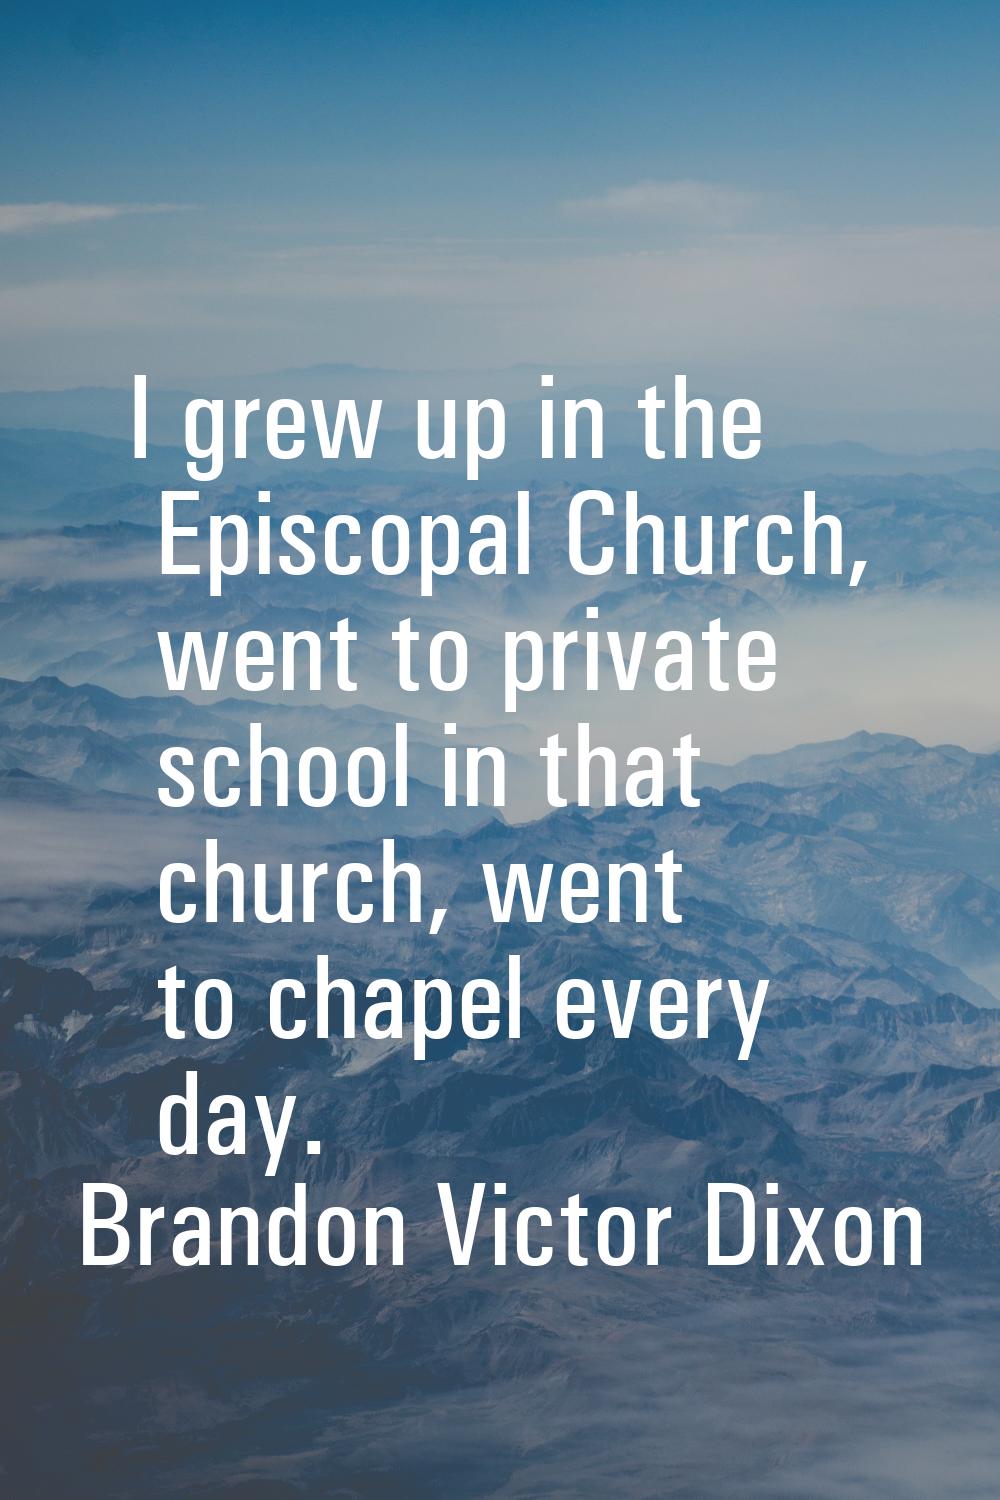 I grew up in the Episcopal Church, went to private school in that church, went to chapel every day.